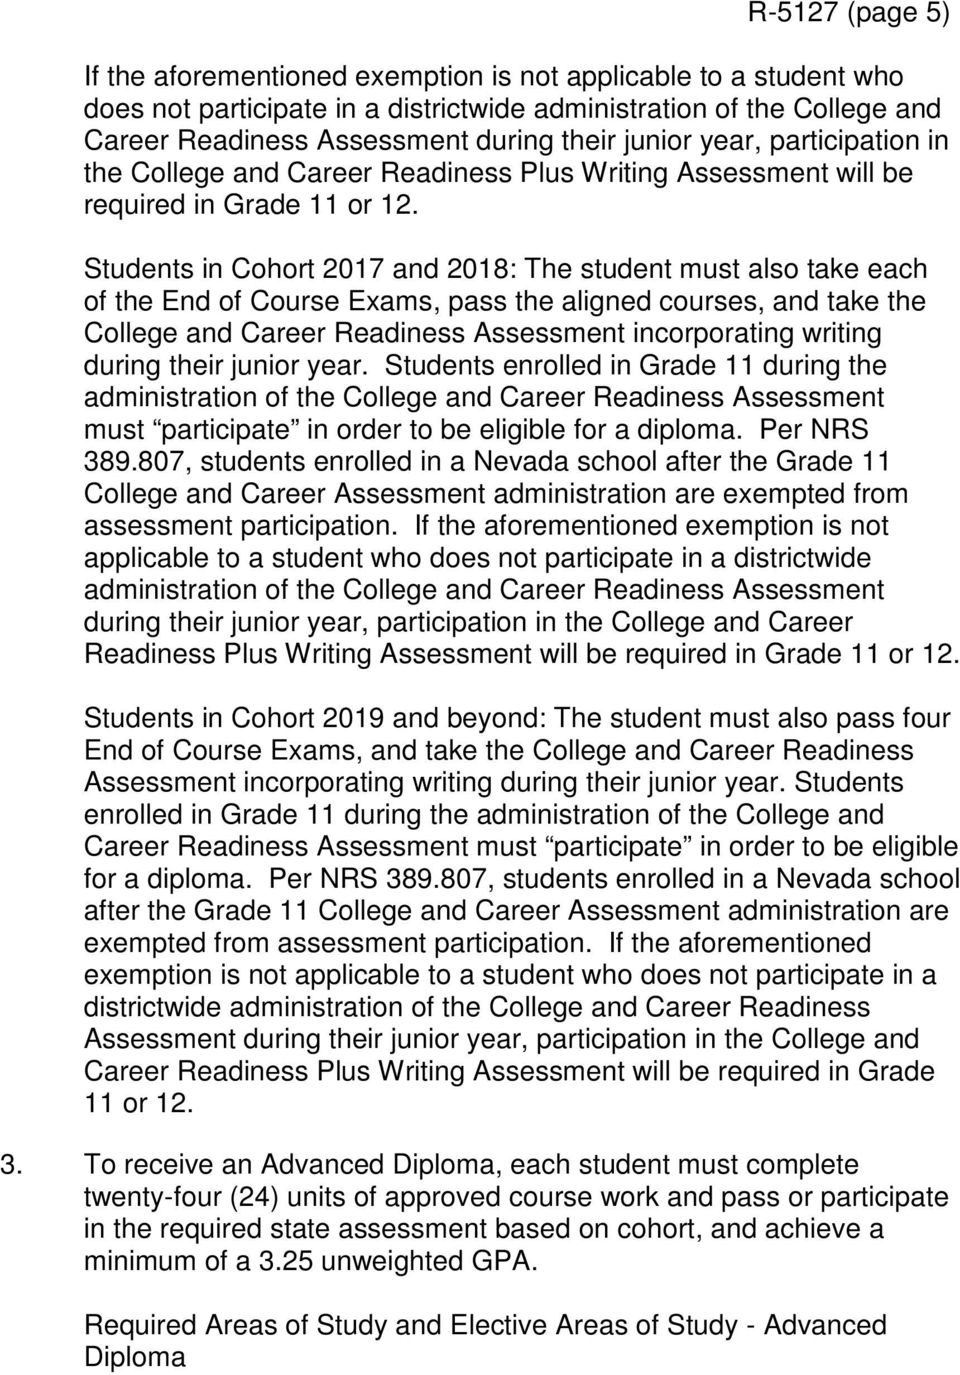 Students in Cohort 2017 and 2018: The student must also take each of the End of Course Exams, pass the aligned courses, and take the College and Career Readiness Assessment incorporating writing